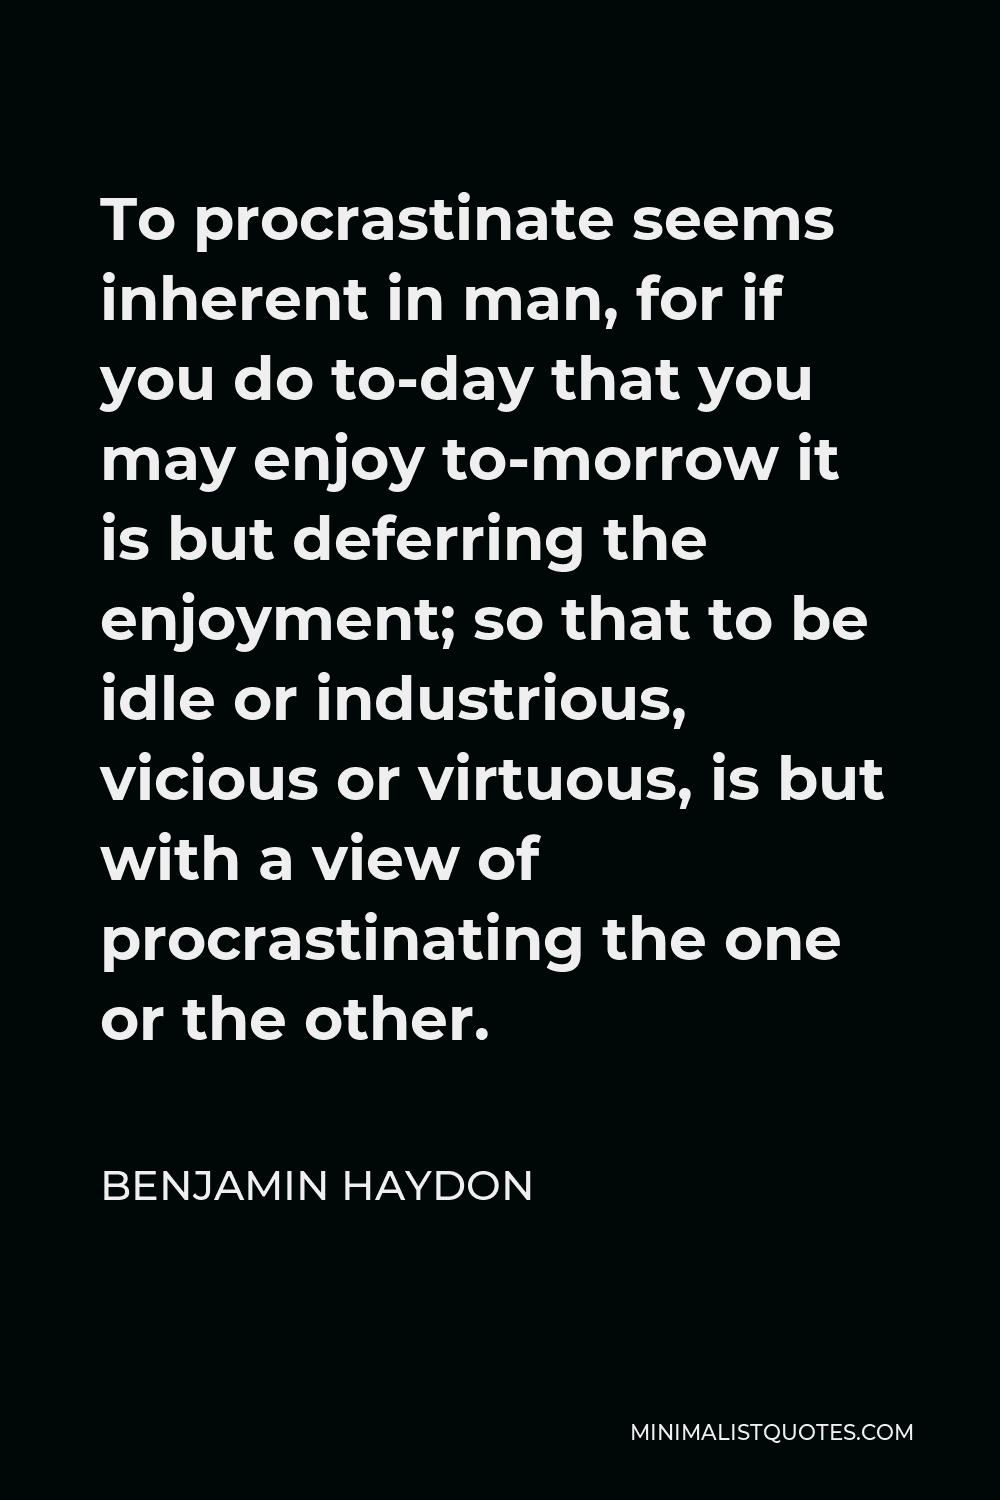 Benjamin Haydon Quote - To procrastinate seems inherent in man, for if you do to-day that you may enjoy to-morrow it is but deferring the enjoyment; so that to be idle or industrious, vicious or virtuous, is but with a view of procrastinating the one or the other.